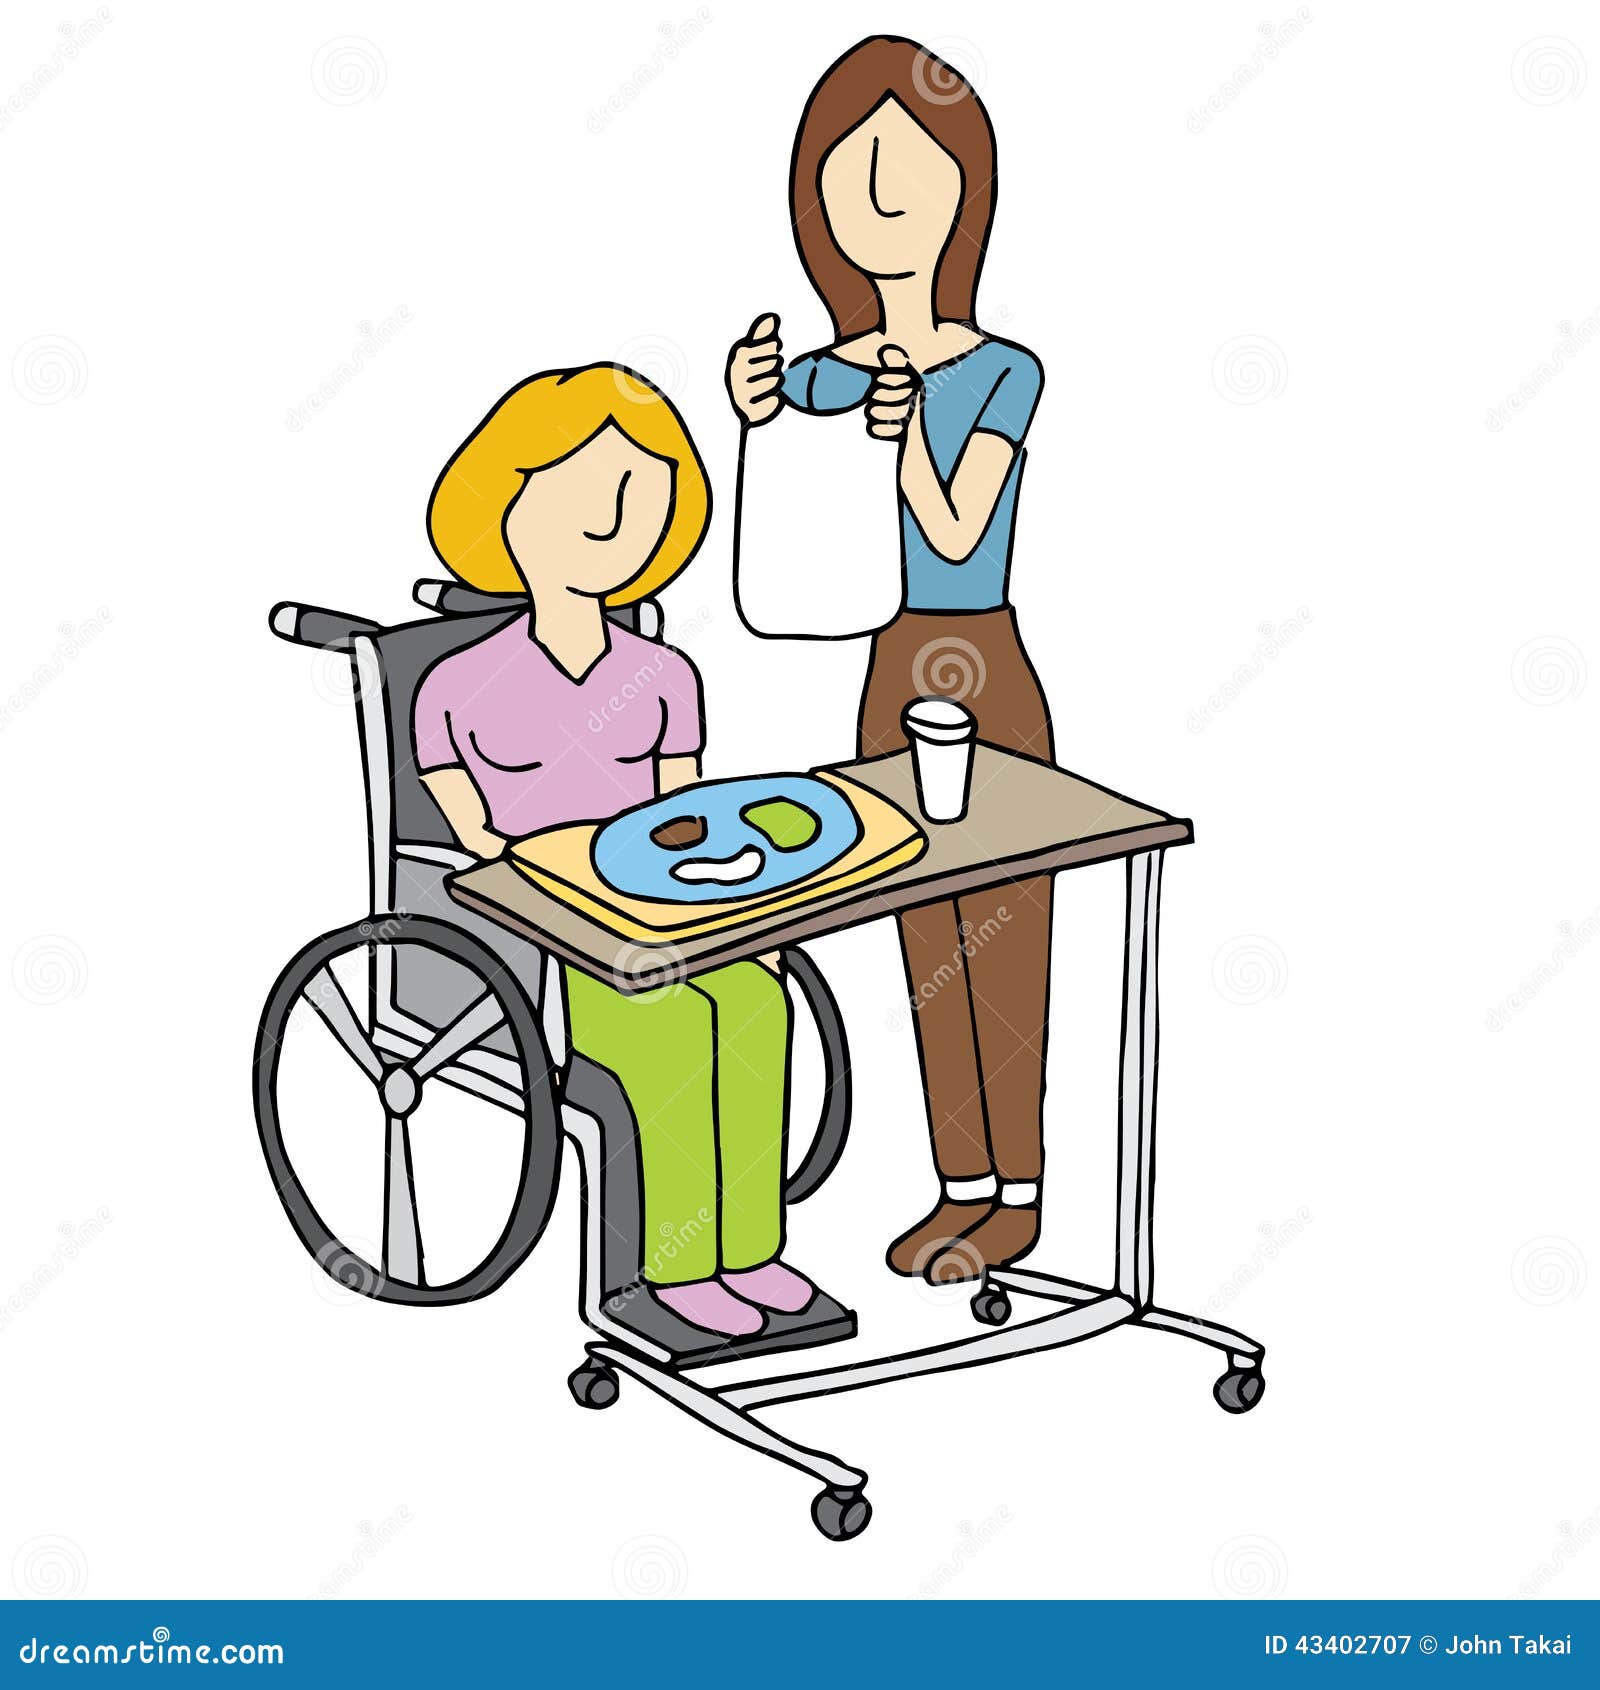 clipart home care - photo #15